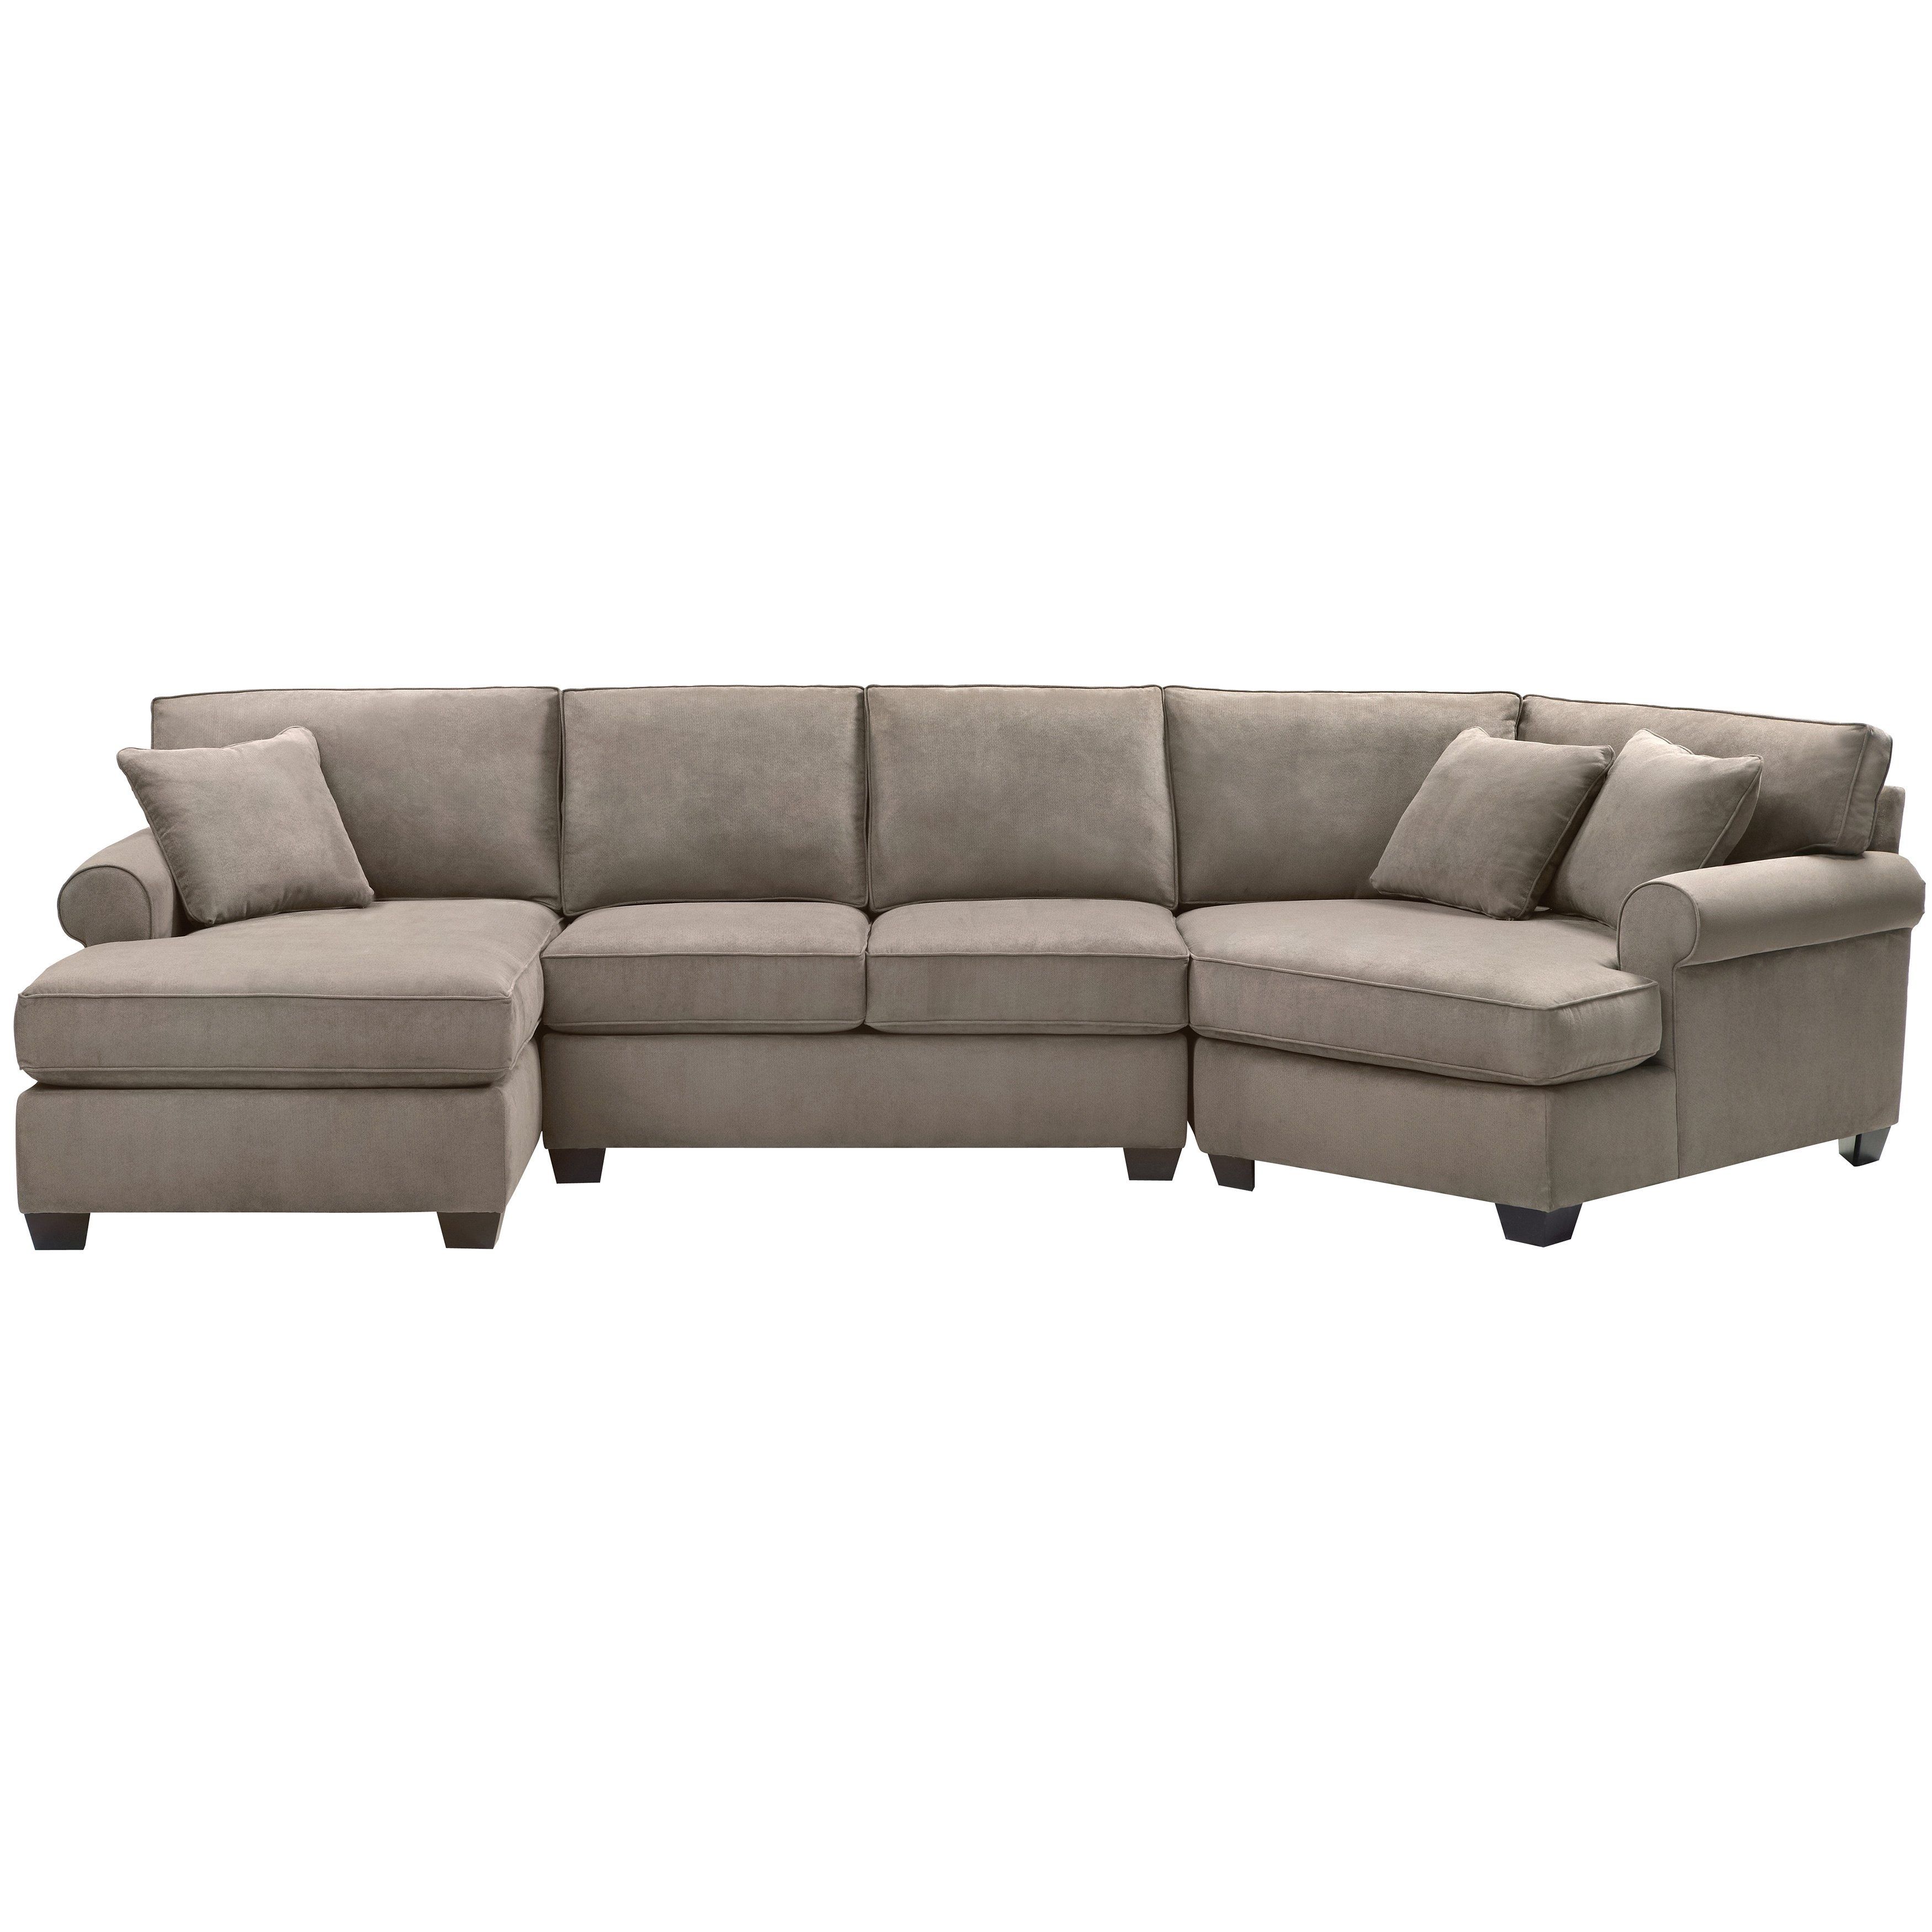 Shop Art Van Marisol Iii 3 Piece Sectional With Accent Pillows For Adeline 3 Piece Sectionals (View 7 of 25)